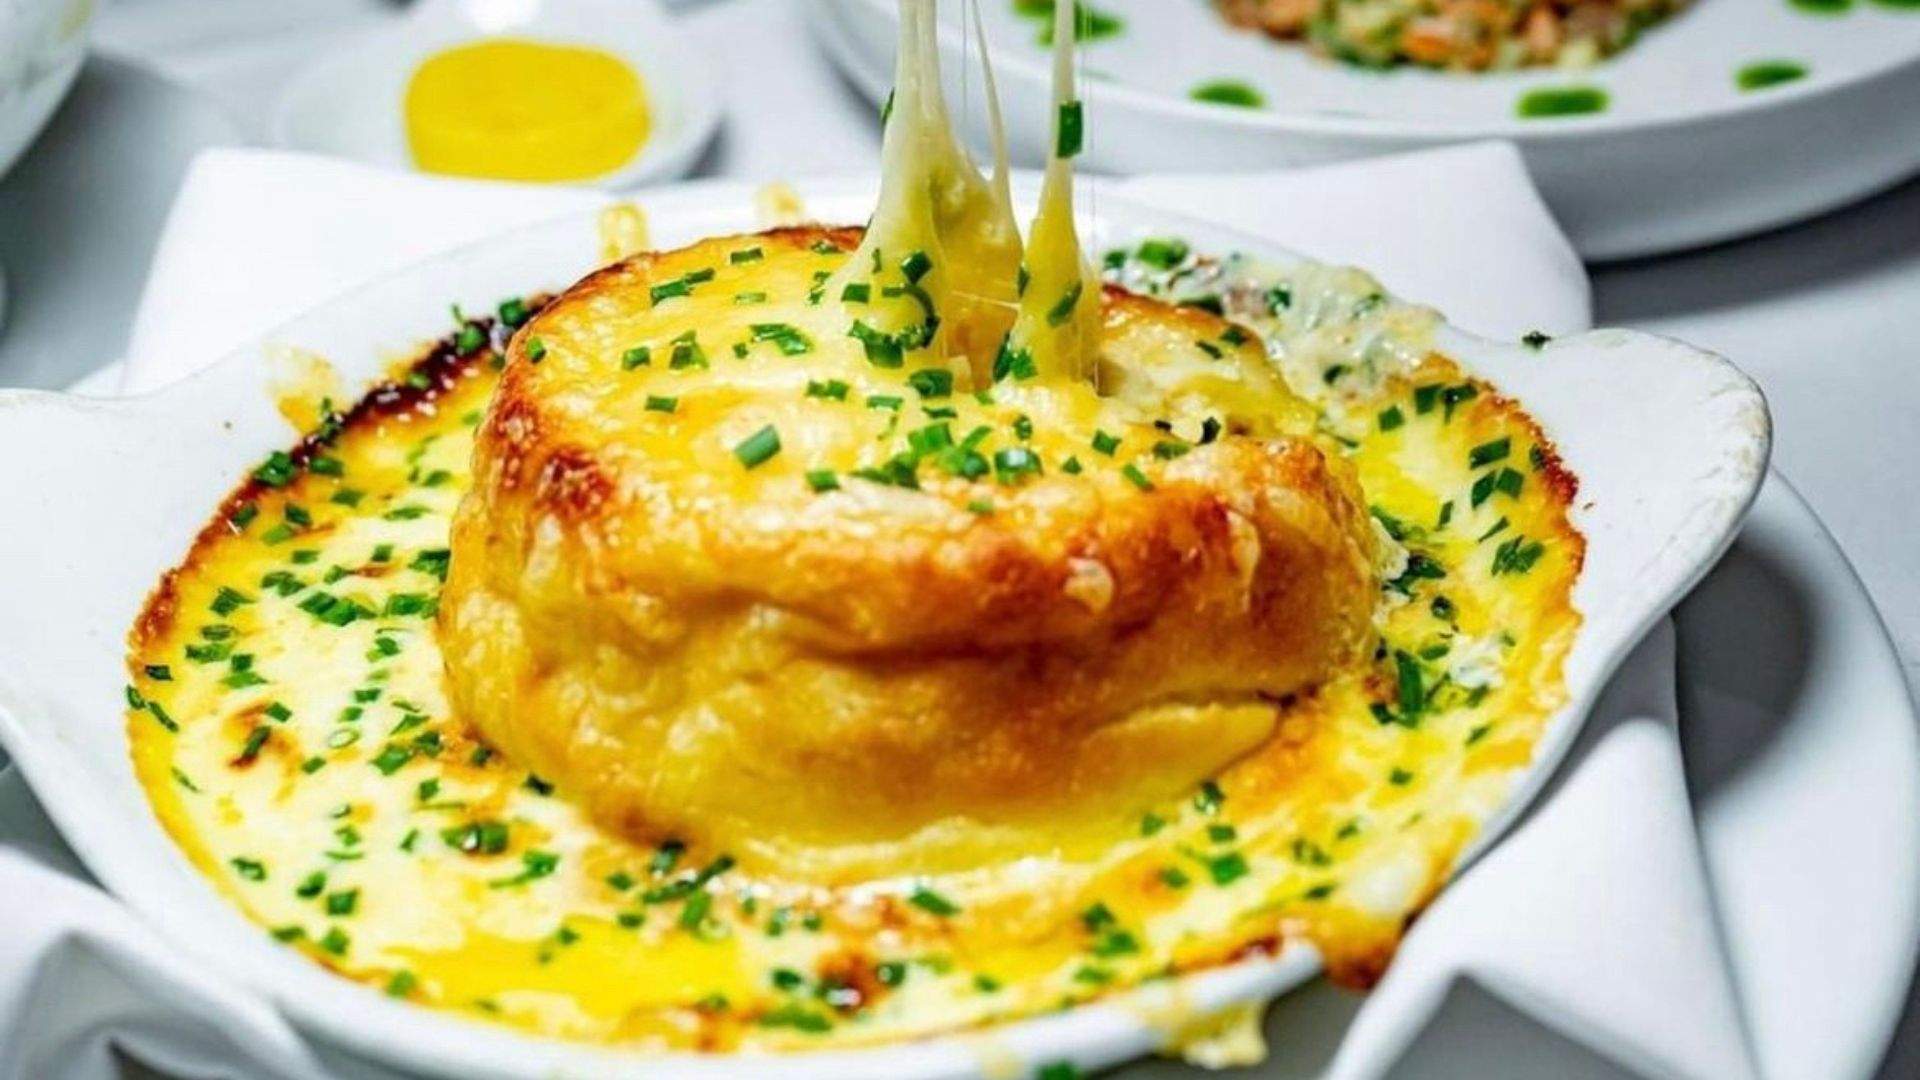 Macleay St Bistro new location with it's OG food: twice-baked French onion cheese souffle.